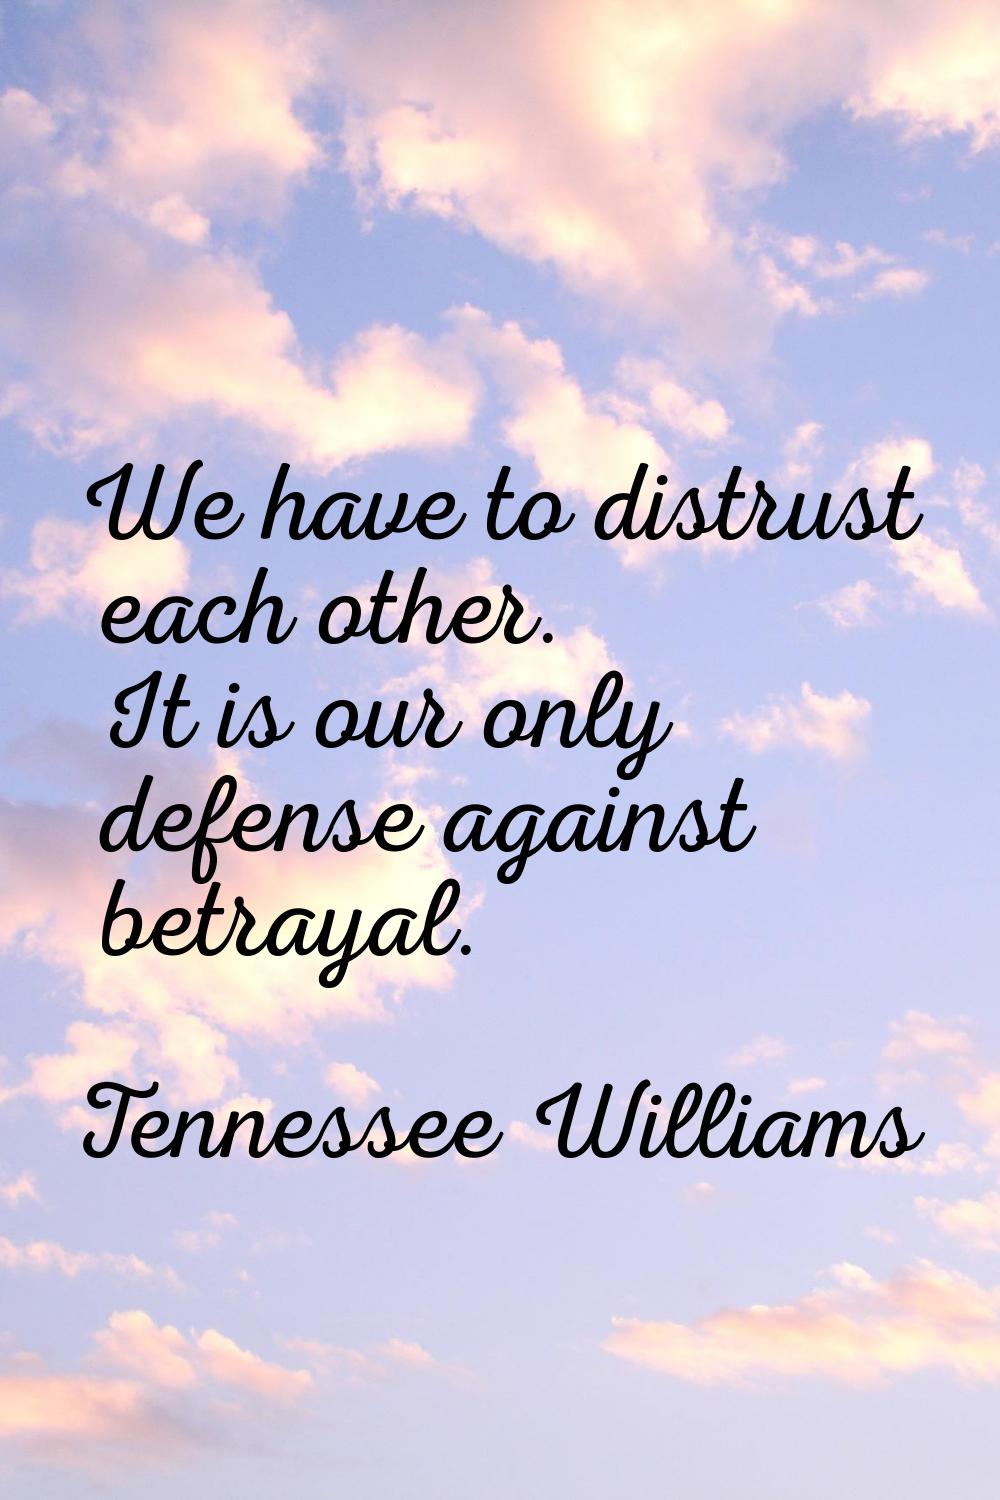 We have to distrust each other. It is our only defense against betrayal.